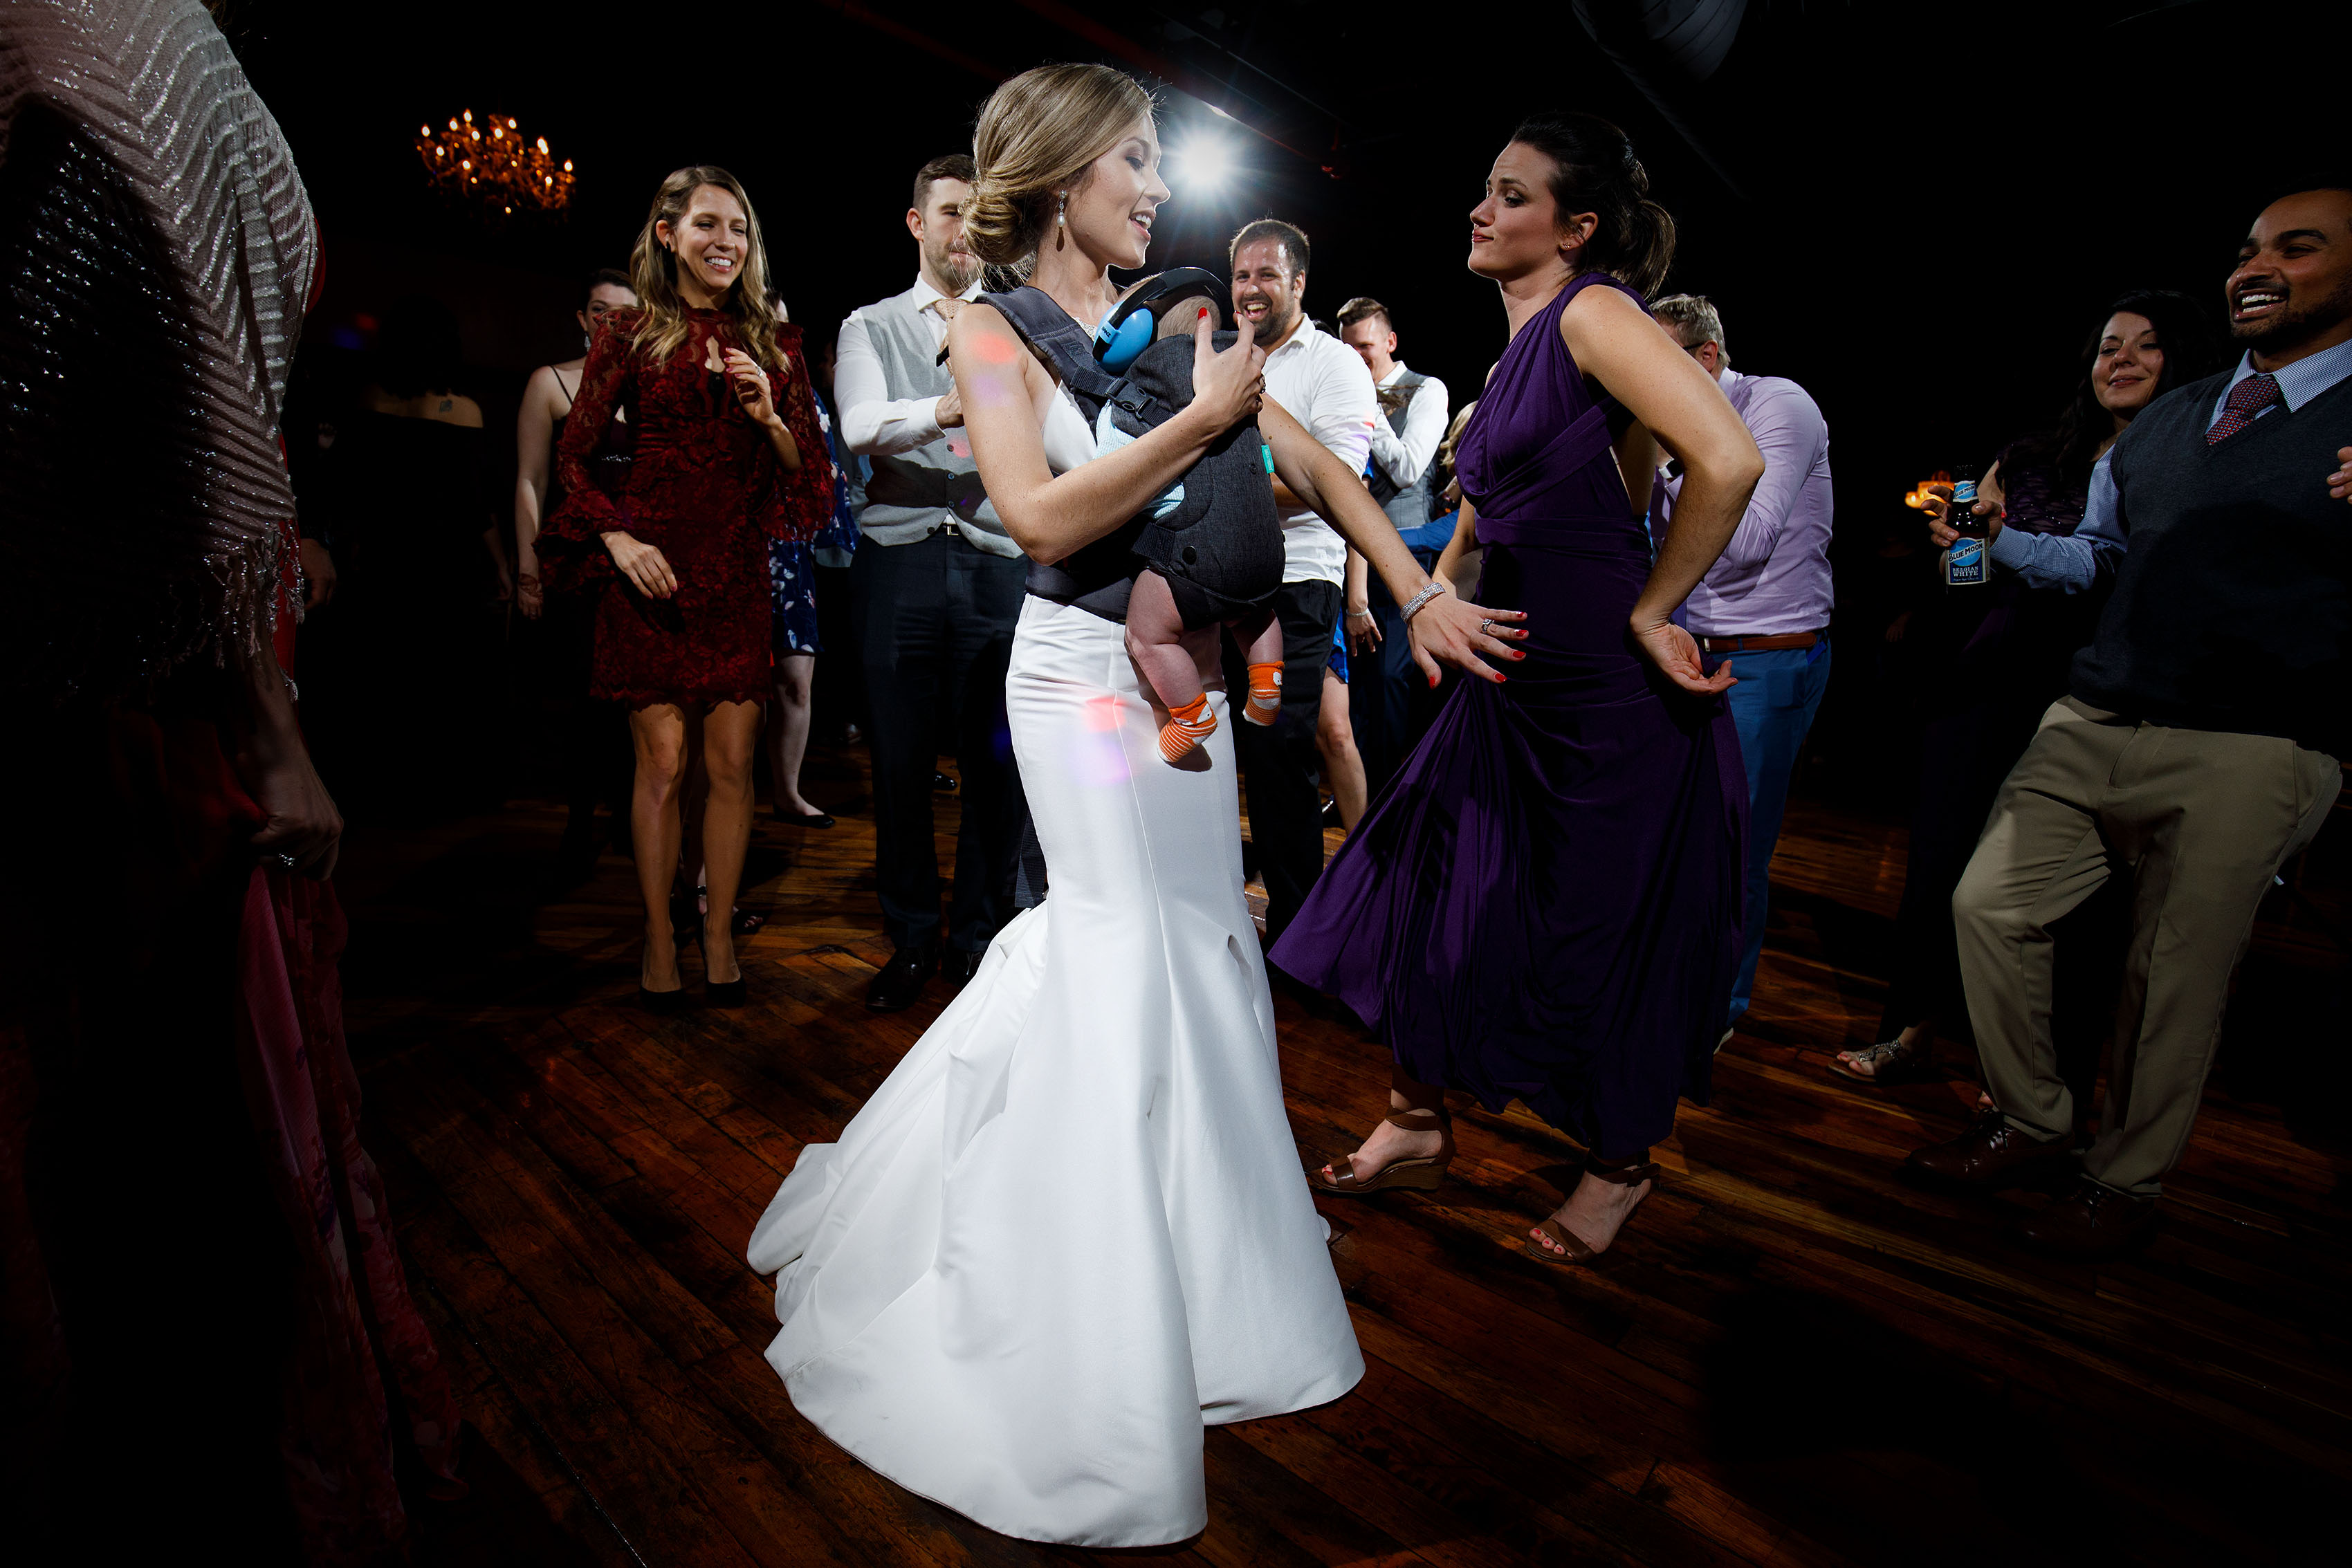 The bride dances with a newborn during her Madison at the Mill wedding